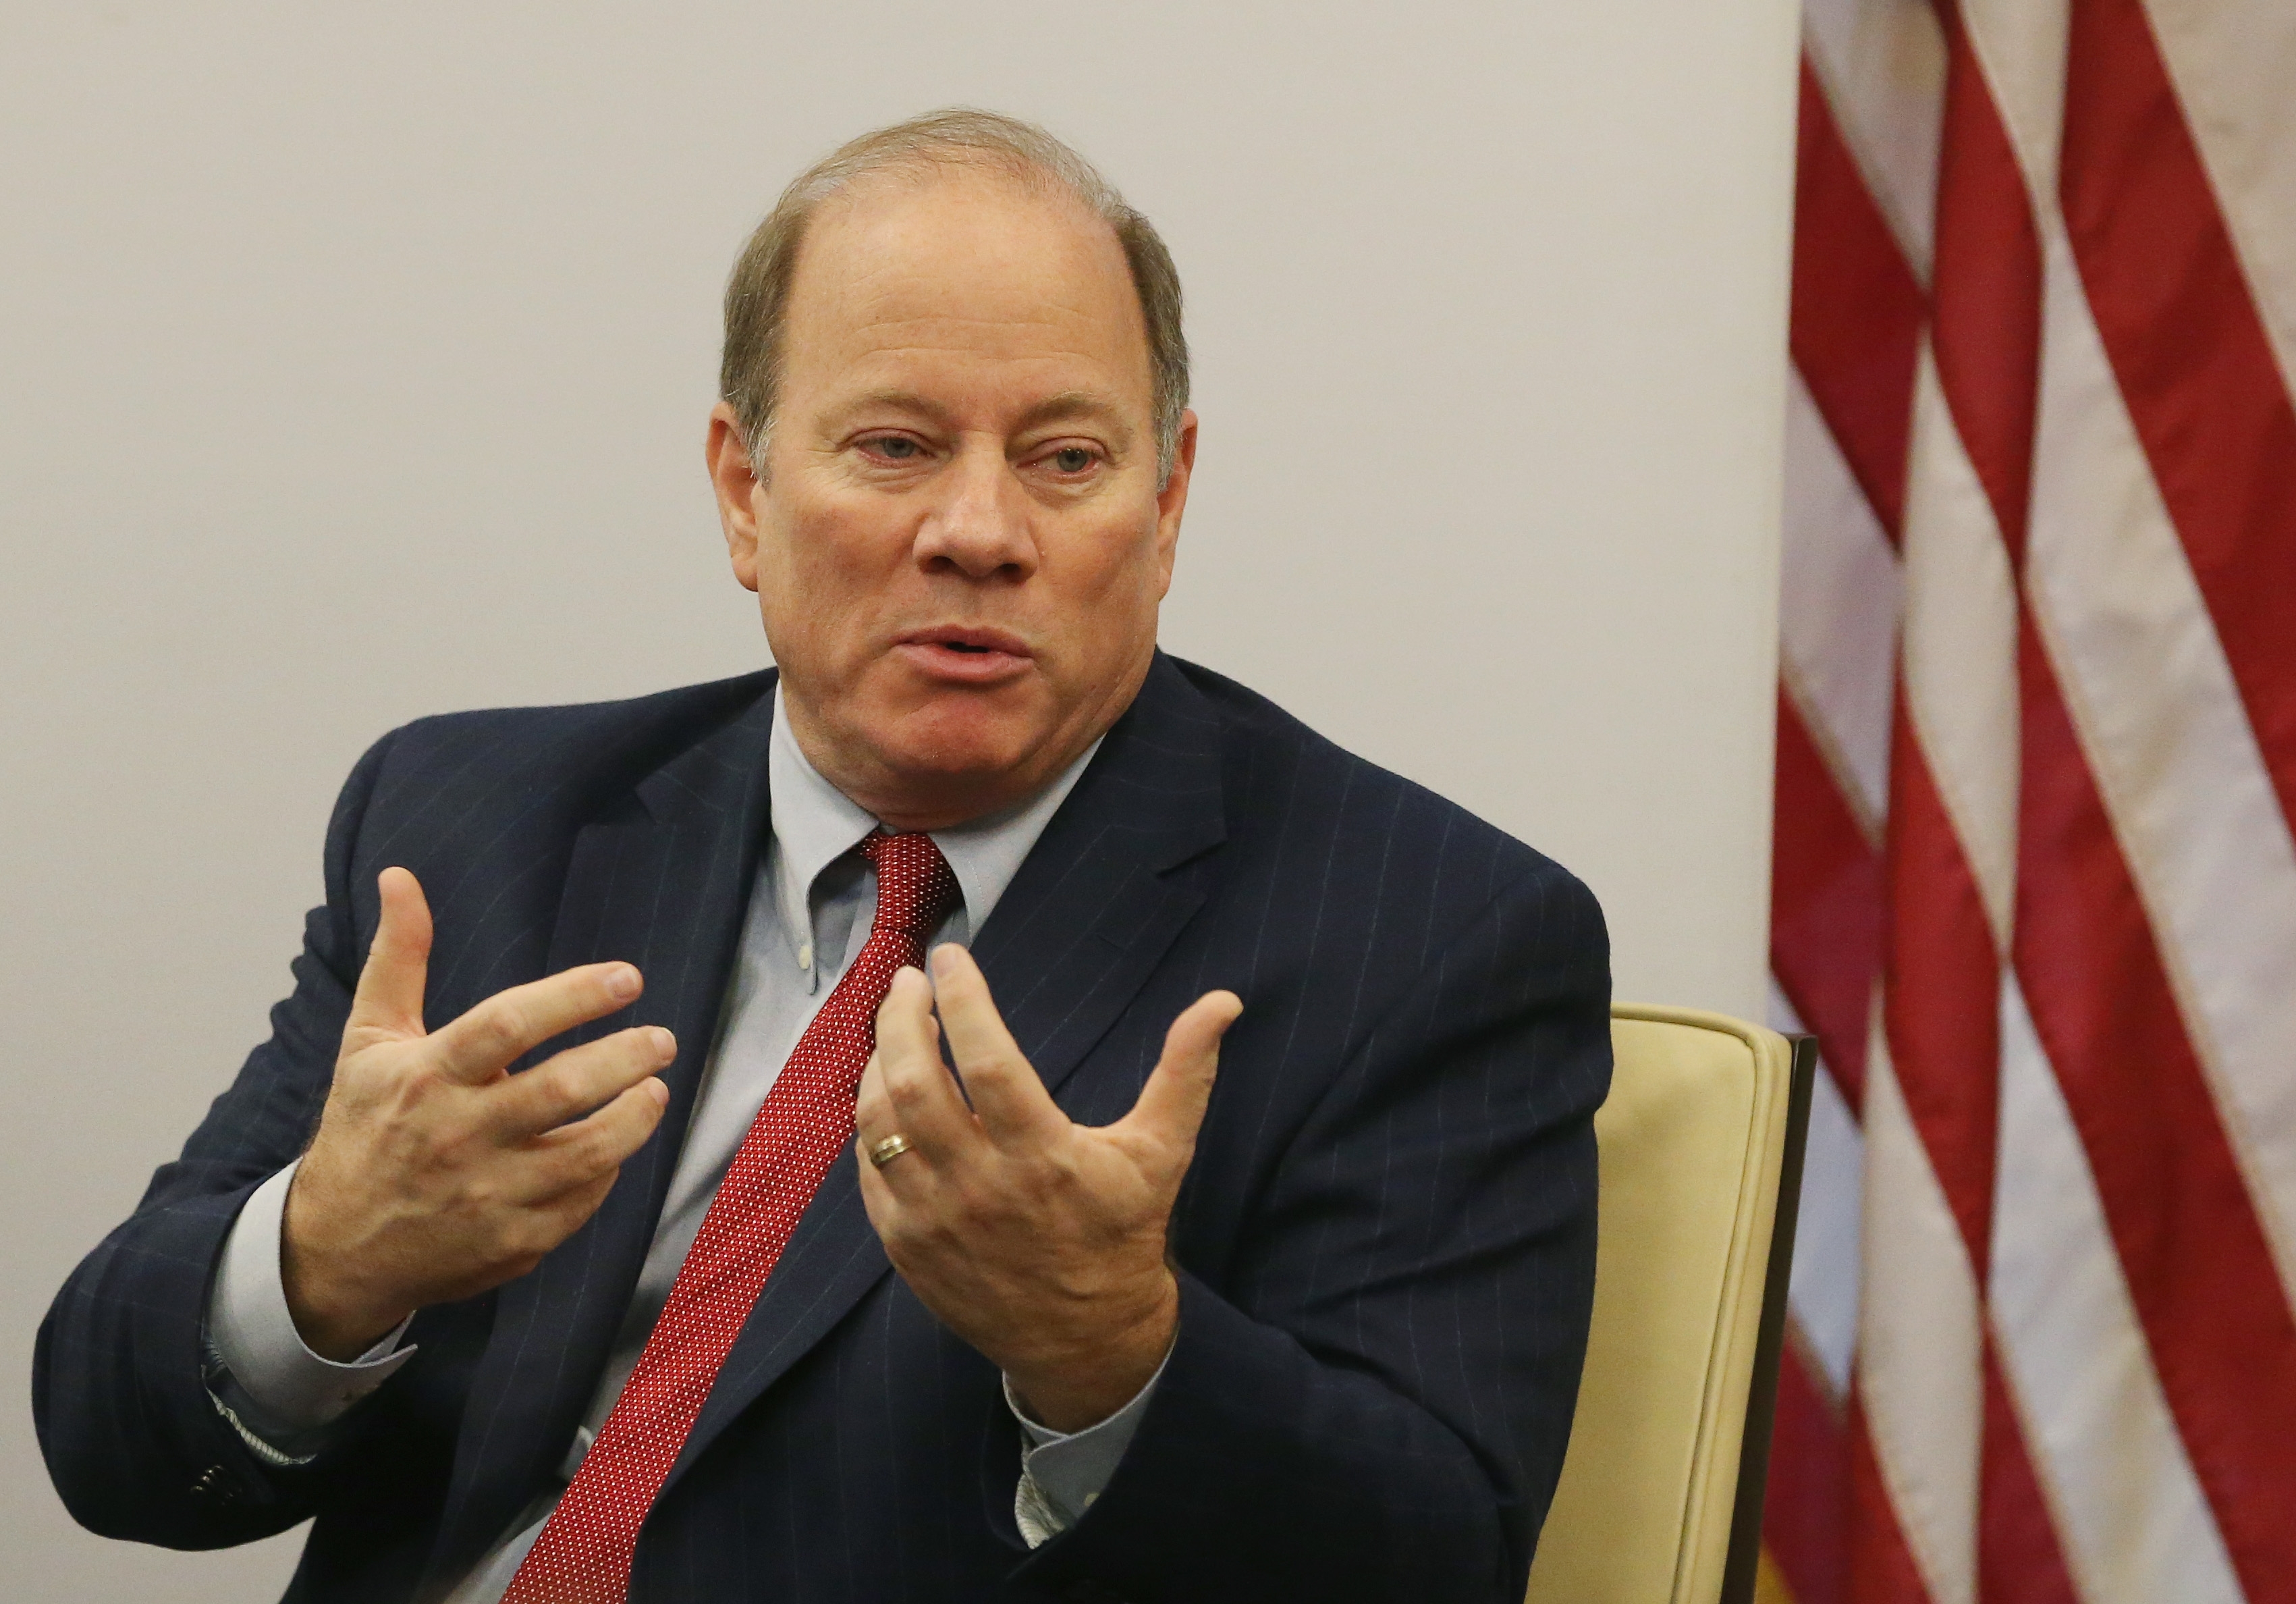 Detroit Mayor Mike Duggan Says City Undercounted In Census By 10